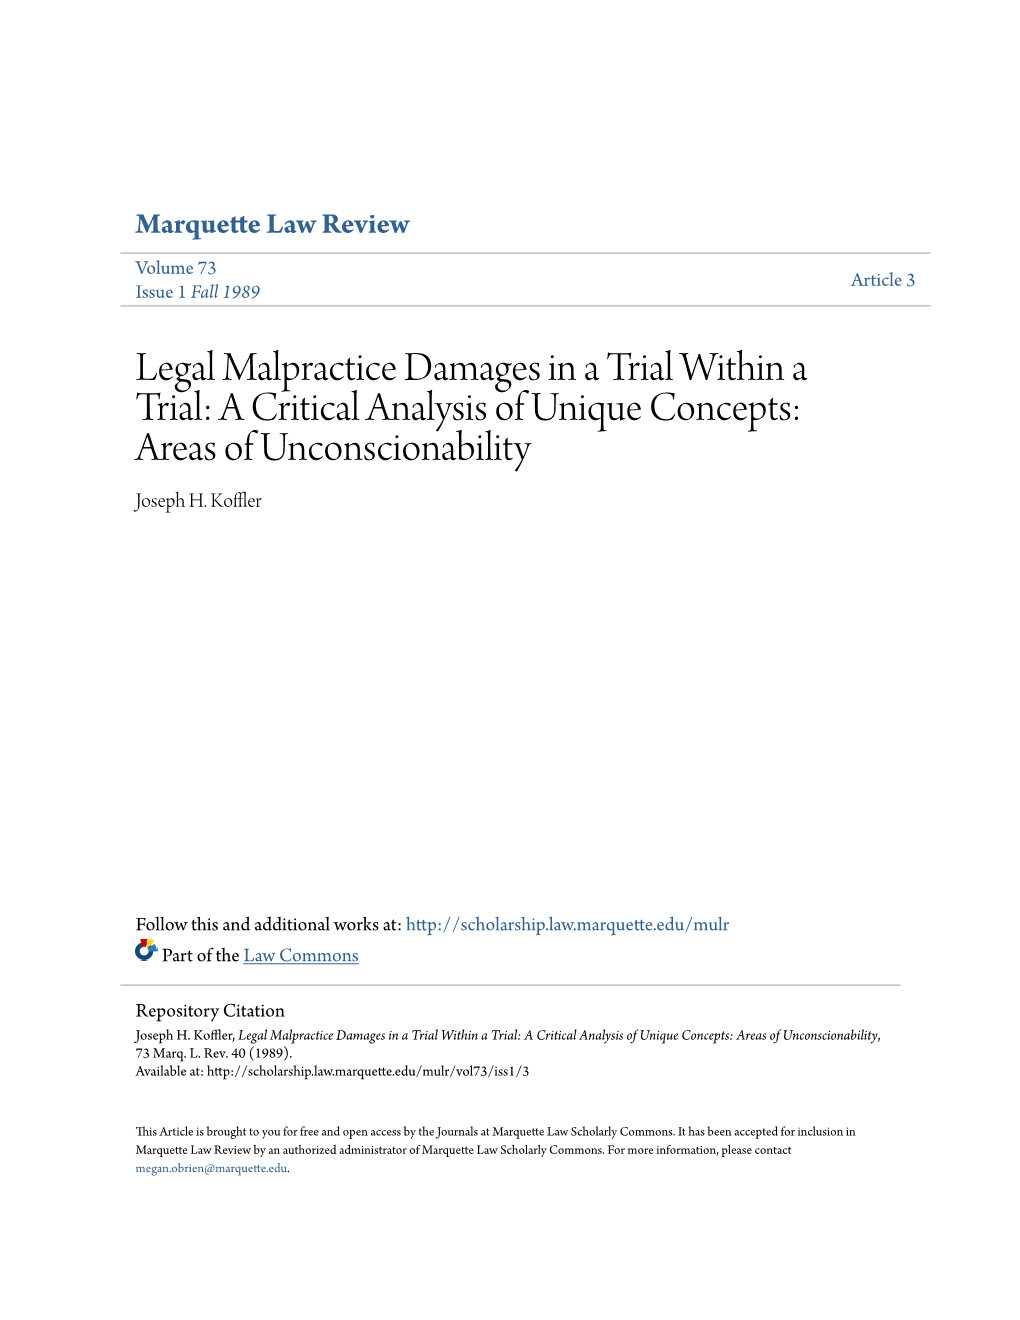 Legal Malpractice Damages in a Trial Within a Trial: a Critical Analysis of Unique Concepts: Areas of Unconscionability Joseph H